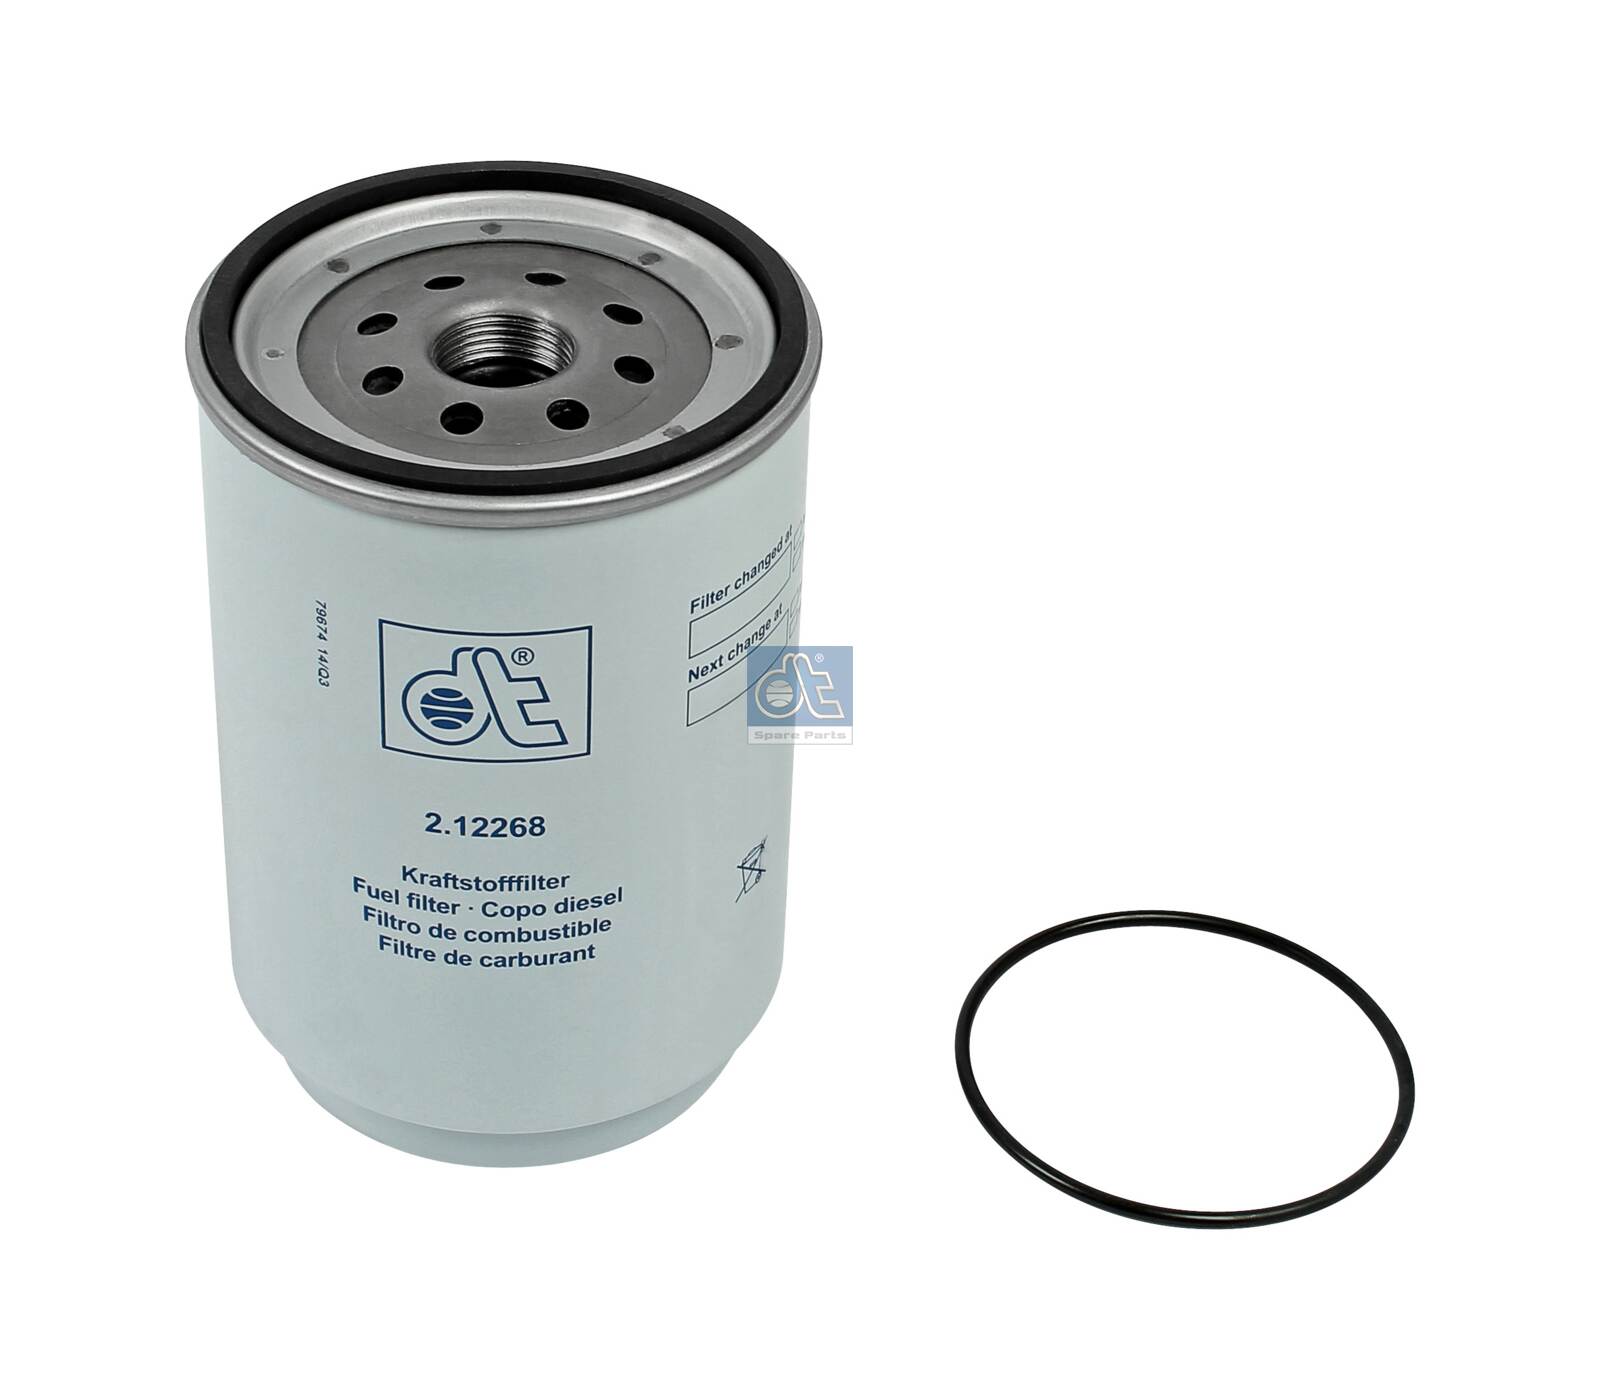 2.12268, Fuel Filter, DT Spare Parts, 1535381, 20539578, 21380488, 5001868493, 1533870, 21041613, 21380483, 1526297, 21017307, 21380524, 7420745605, 20998349, 21380526, 7420998349, 21366596, 7421380483, 20745605, 20788794, 20869725, 20879812, 03345201, 0338016, 16-343230006, 24.146.00, 35342, 4057795614390, 50014194, 78946, BF1387-O, F026402132